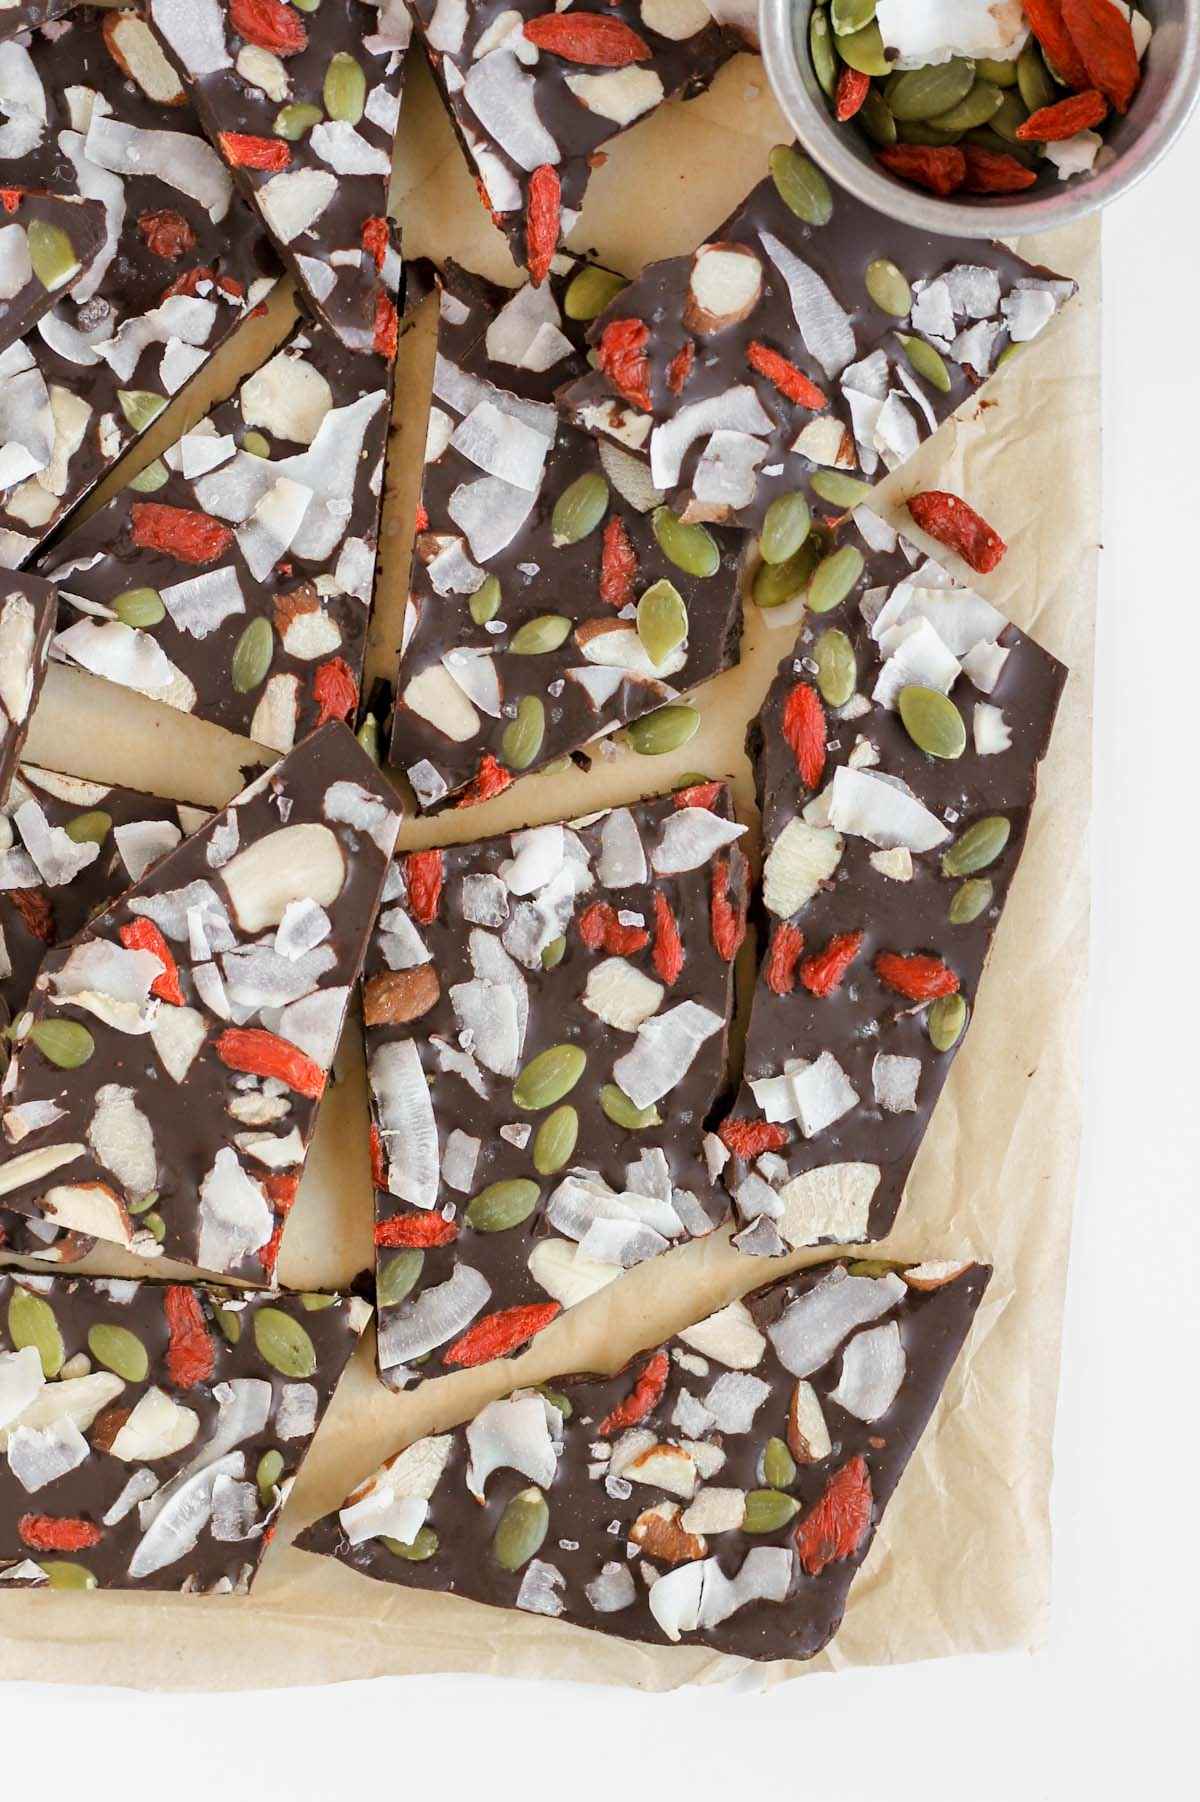 Pieces of chocolate bark with dried fruit, nuts, and seeds.